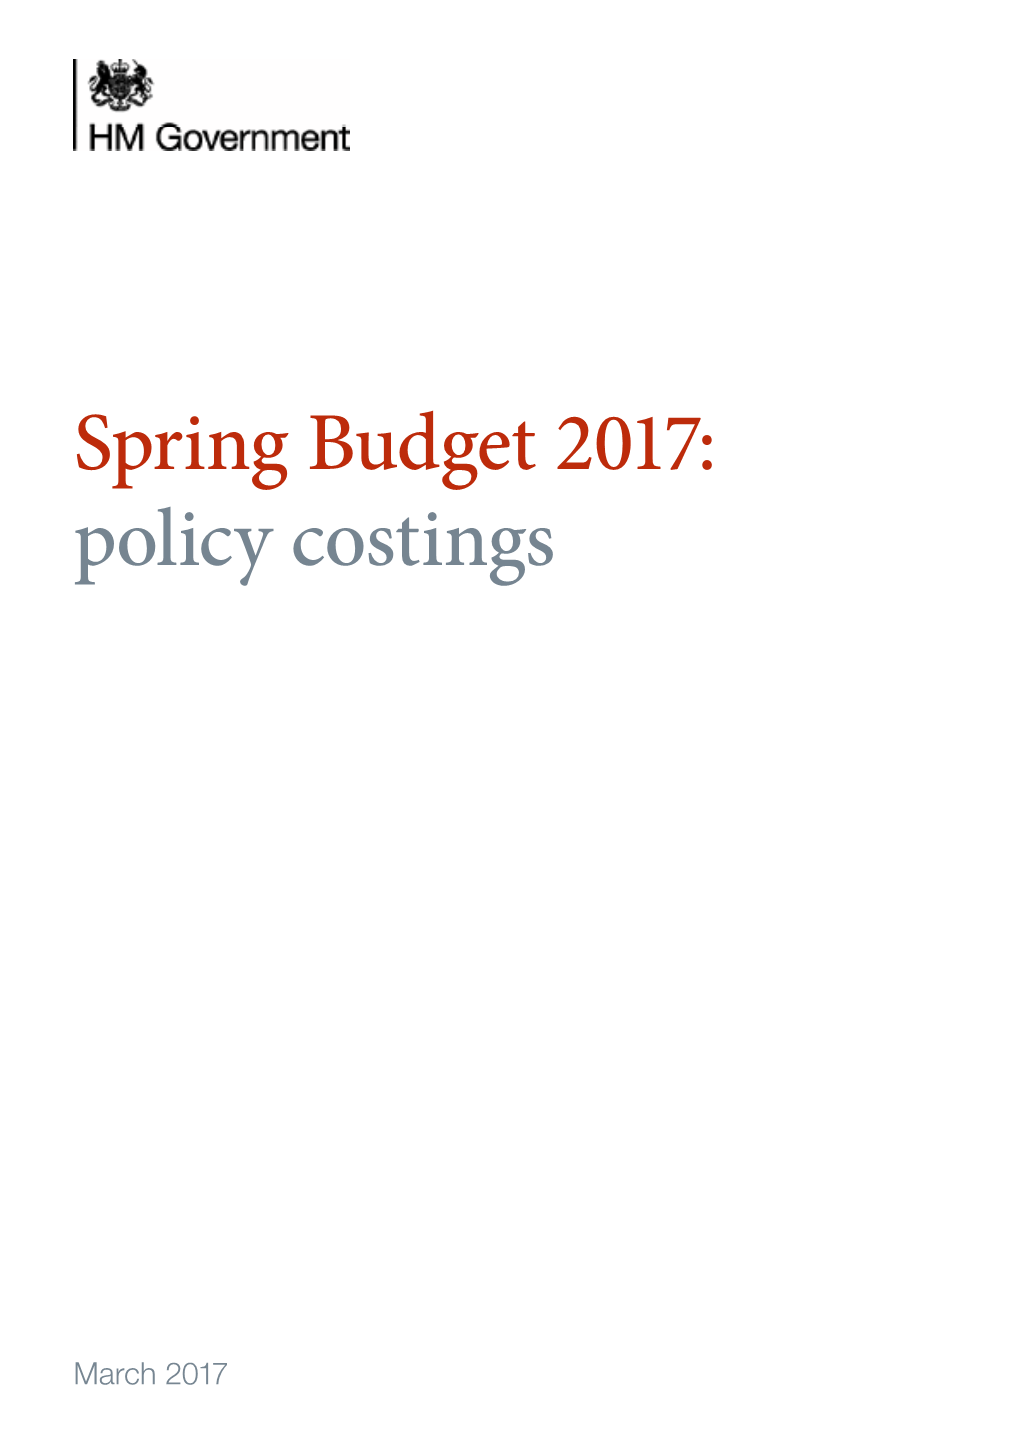 Spring Budget 2017: Policy Costings